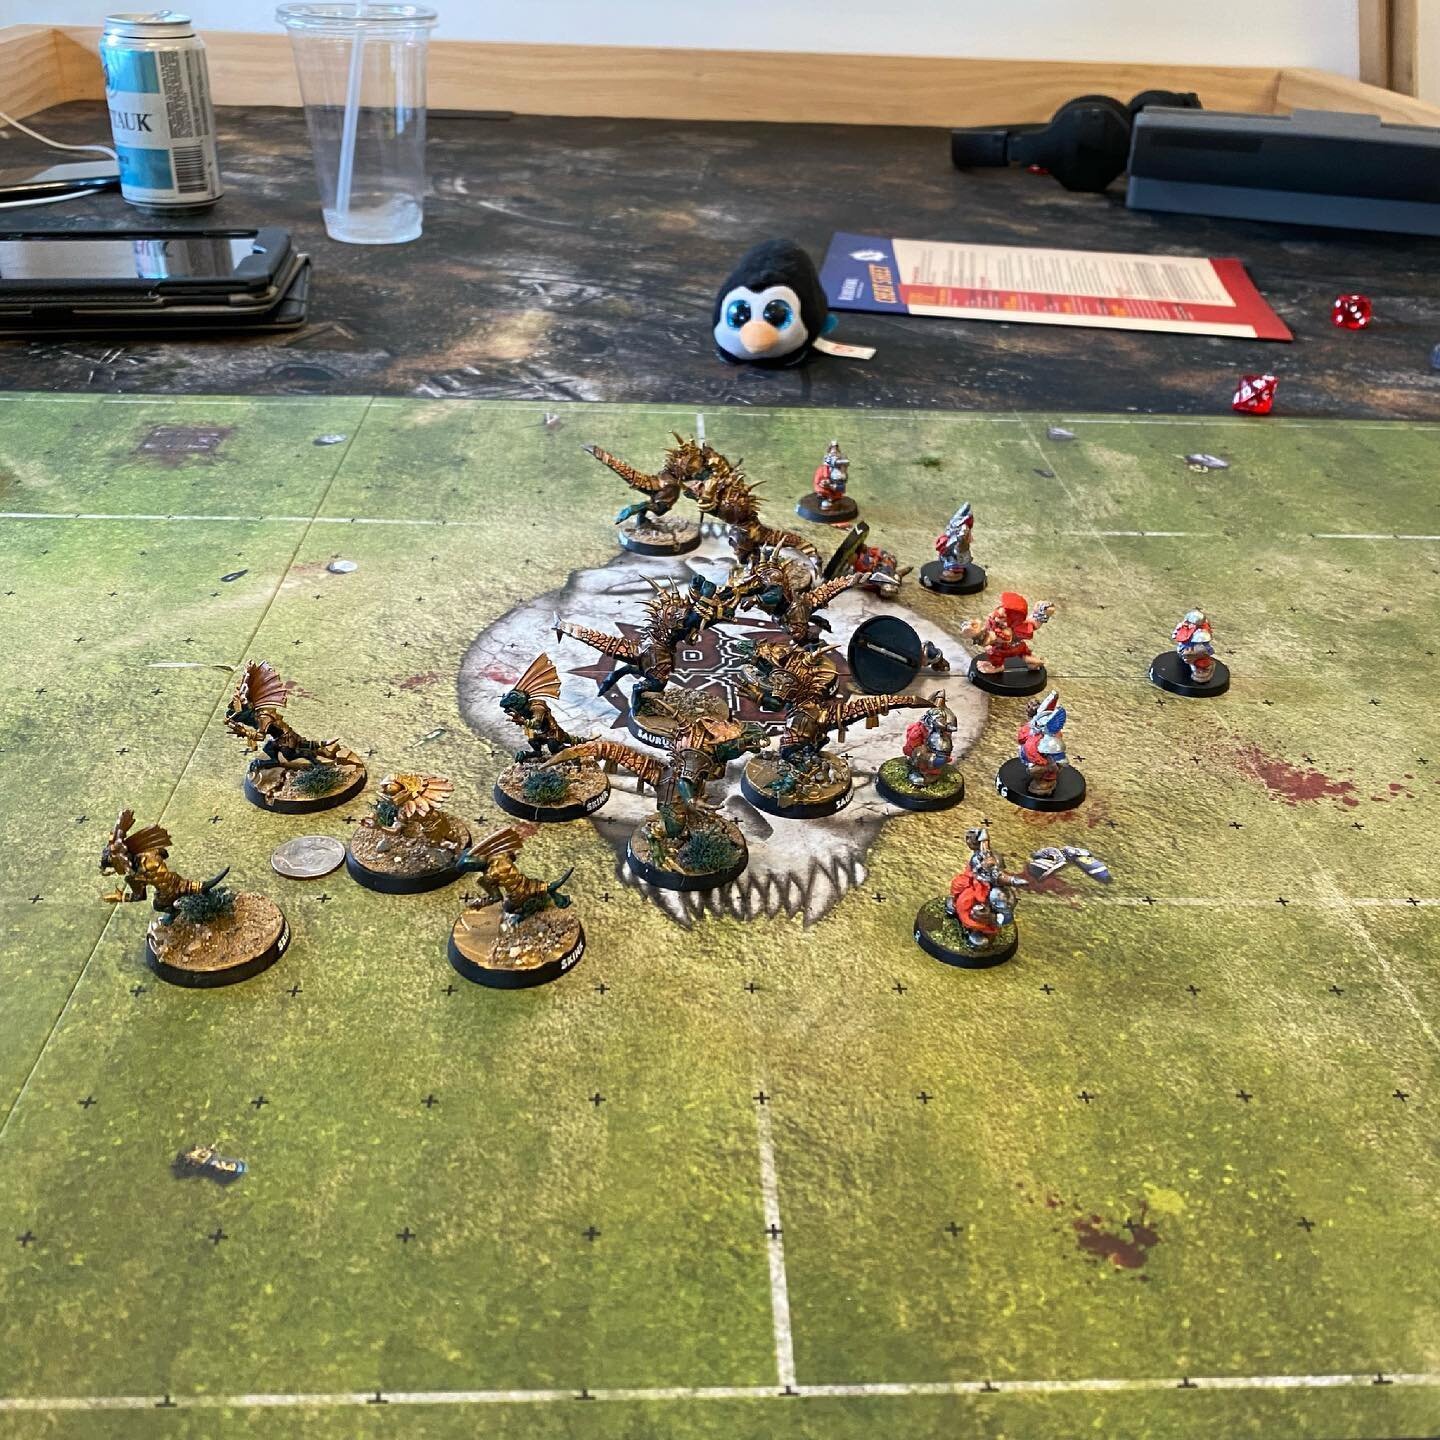 We kicked off the 2021 Blood Bowl season in style yesterday. So awesome to see so many beautiful teams on the pitch! #bloodbowl #gamesworkshop #tabletop #miniatures #gaming  #brooklyn #newyork #nyc